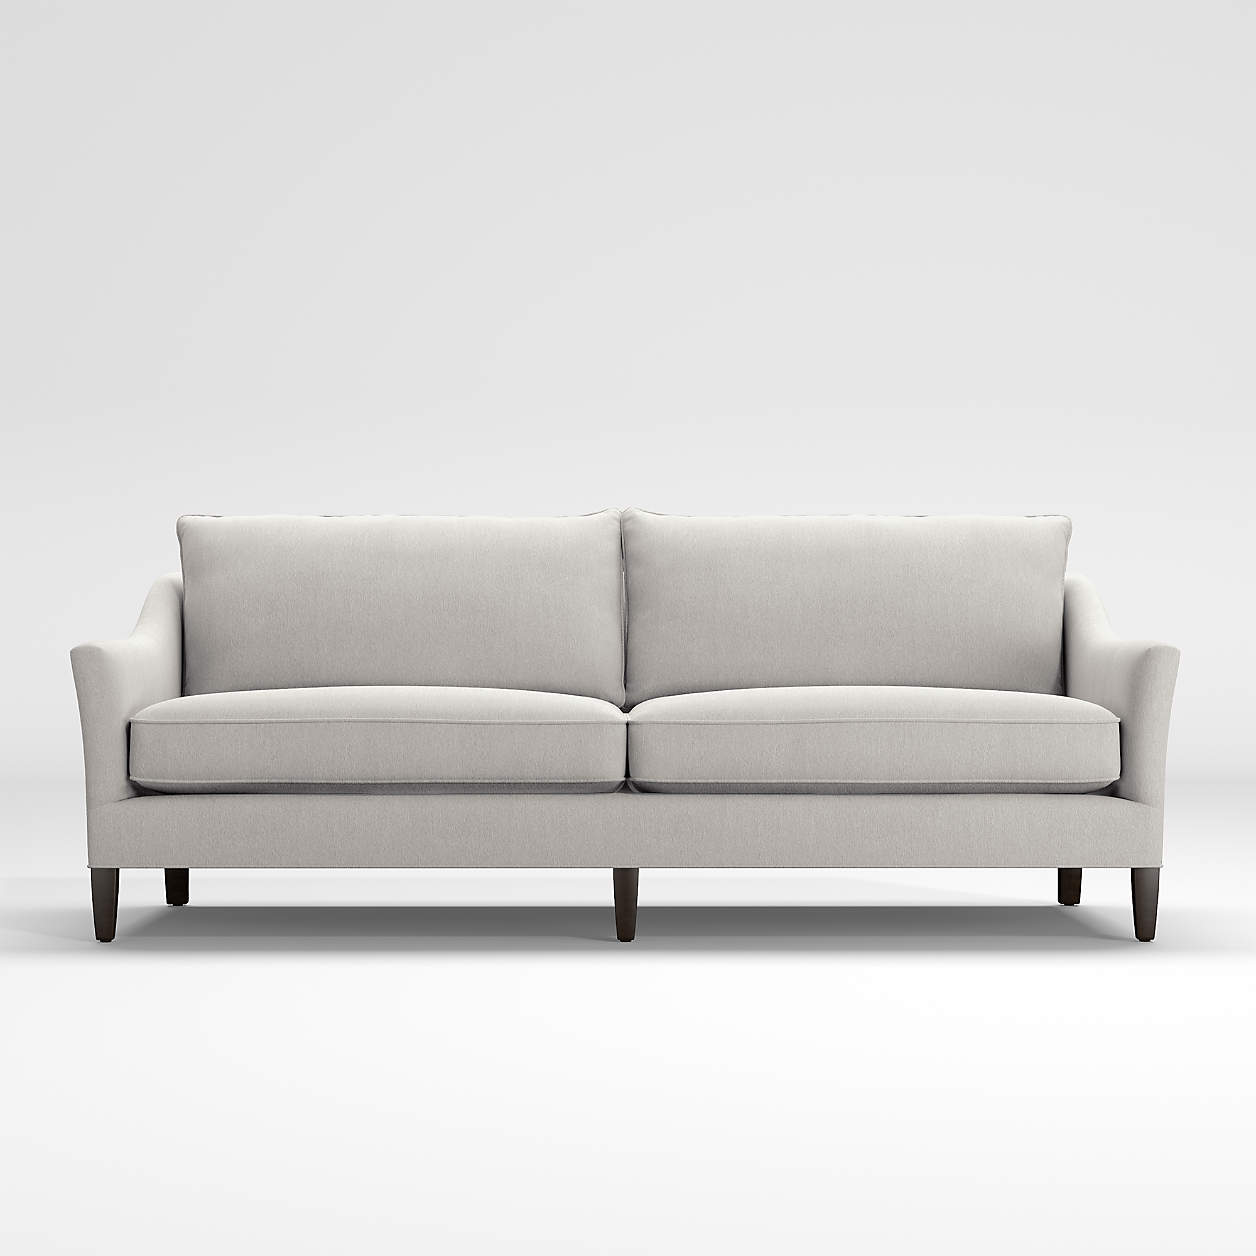 Keely Sofa Reviews Crate And Barrel 